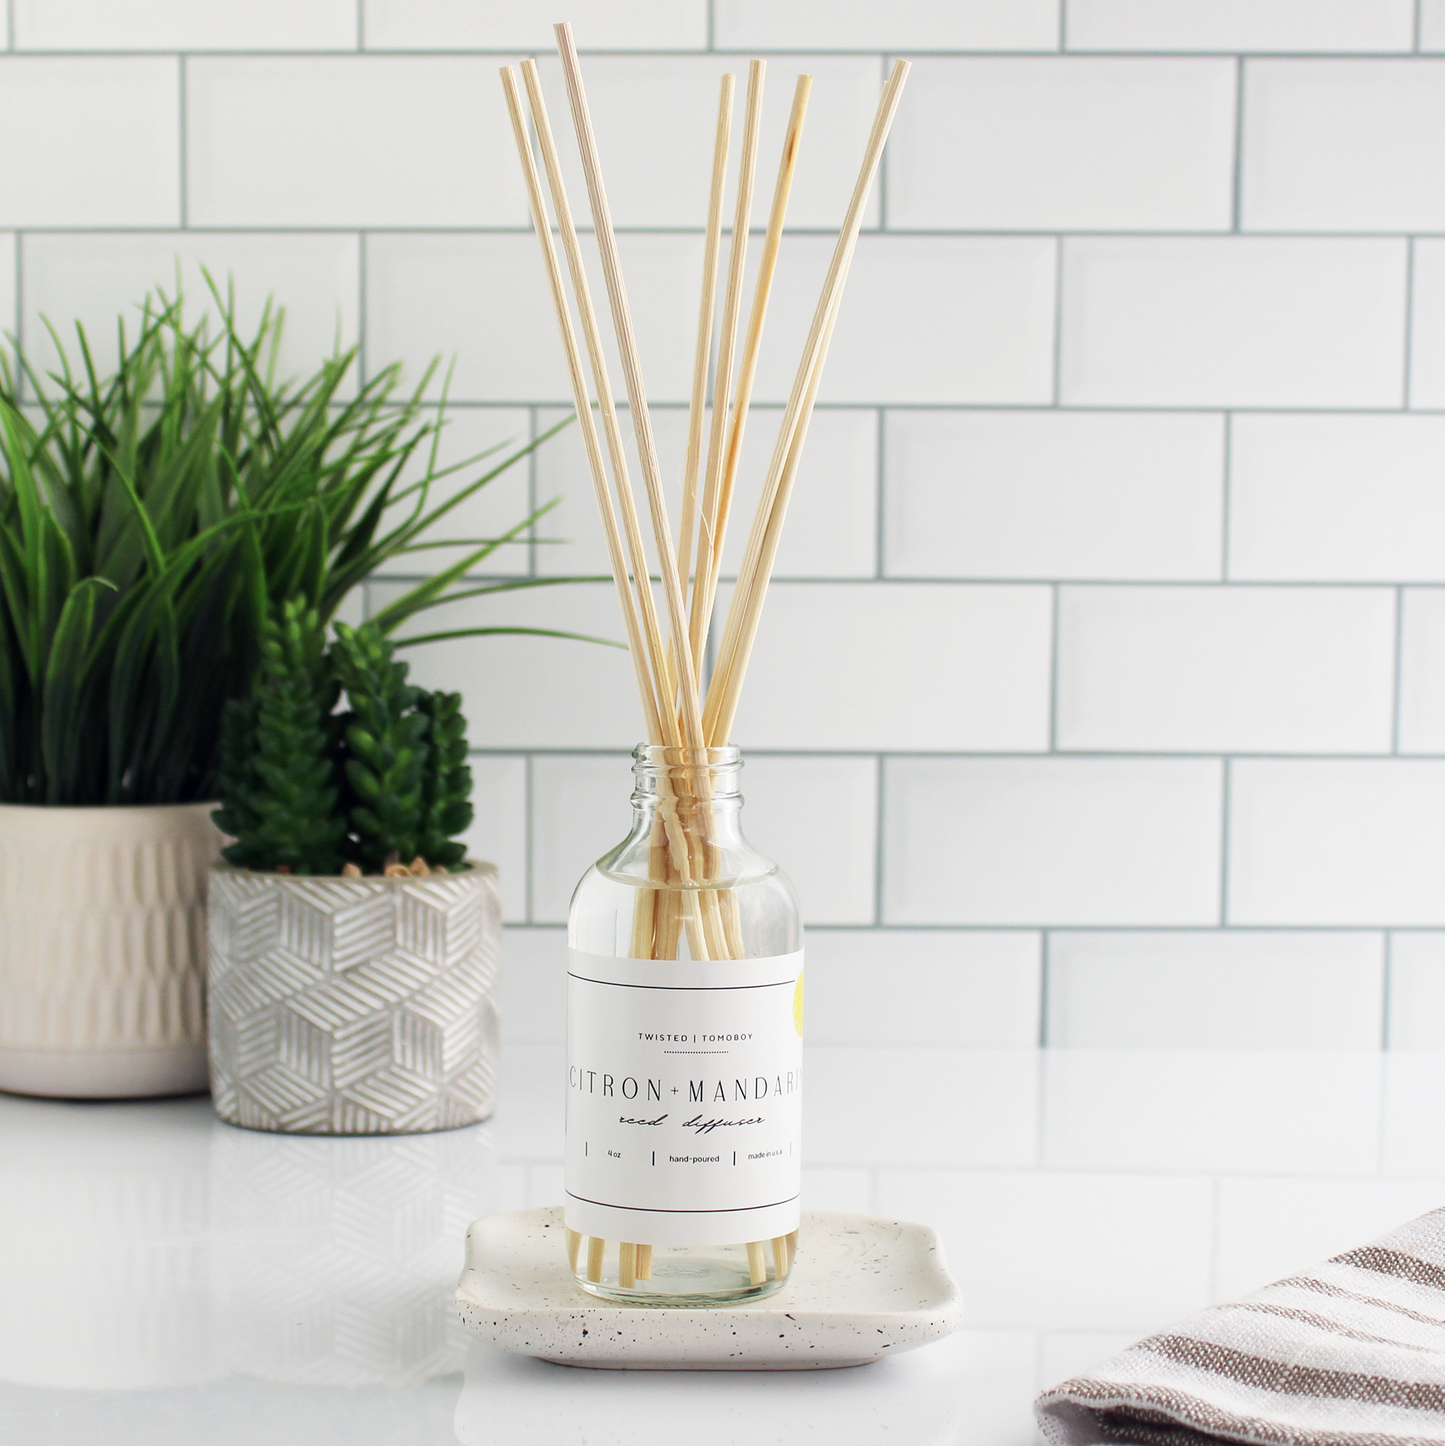 Home Collection | Reed Diffusers (4 oz.): White Oak+Vanilla